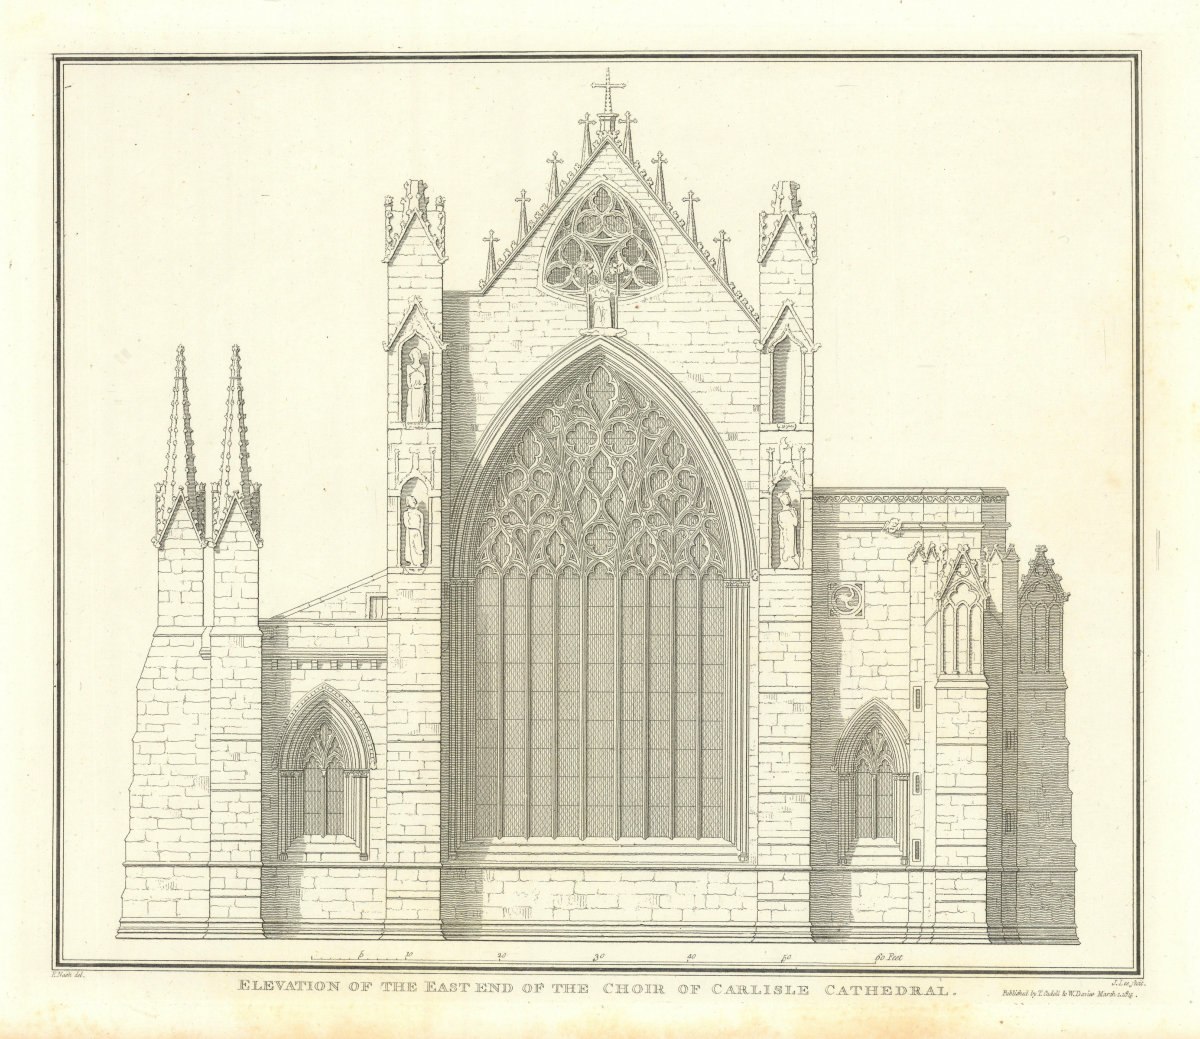 Associate Product Elevation of the East End of the Choir of Carlisle Cathedral. Cumbria 1816